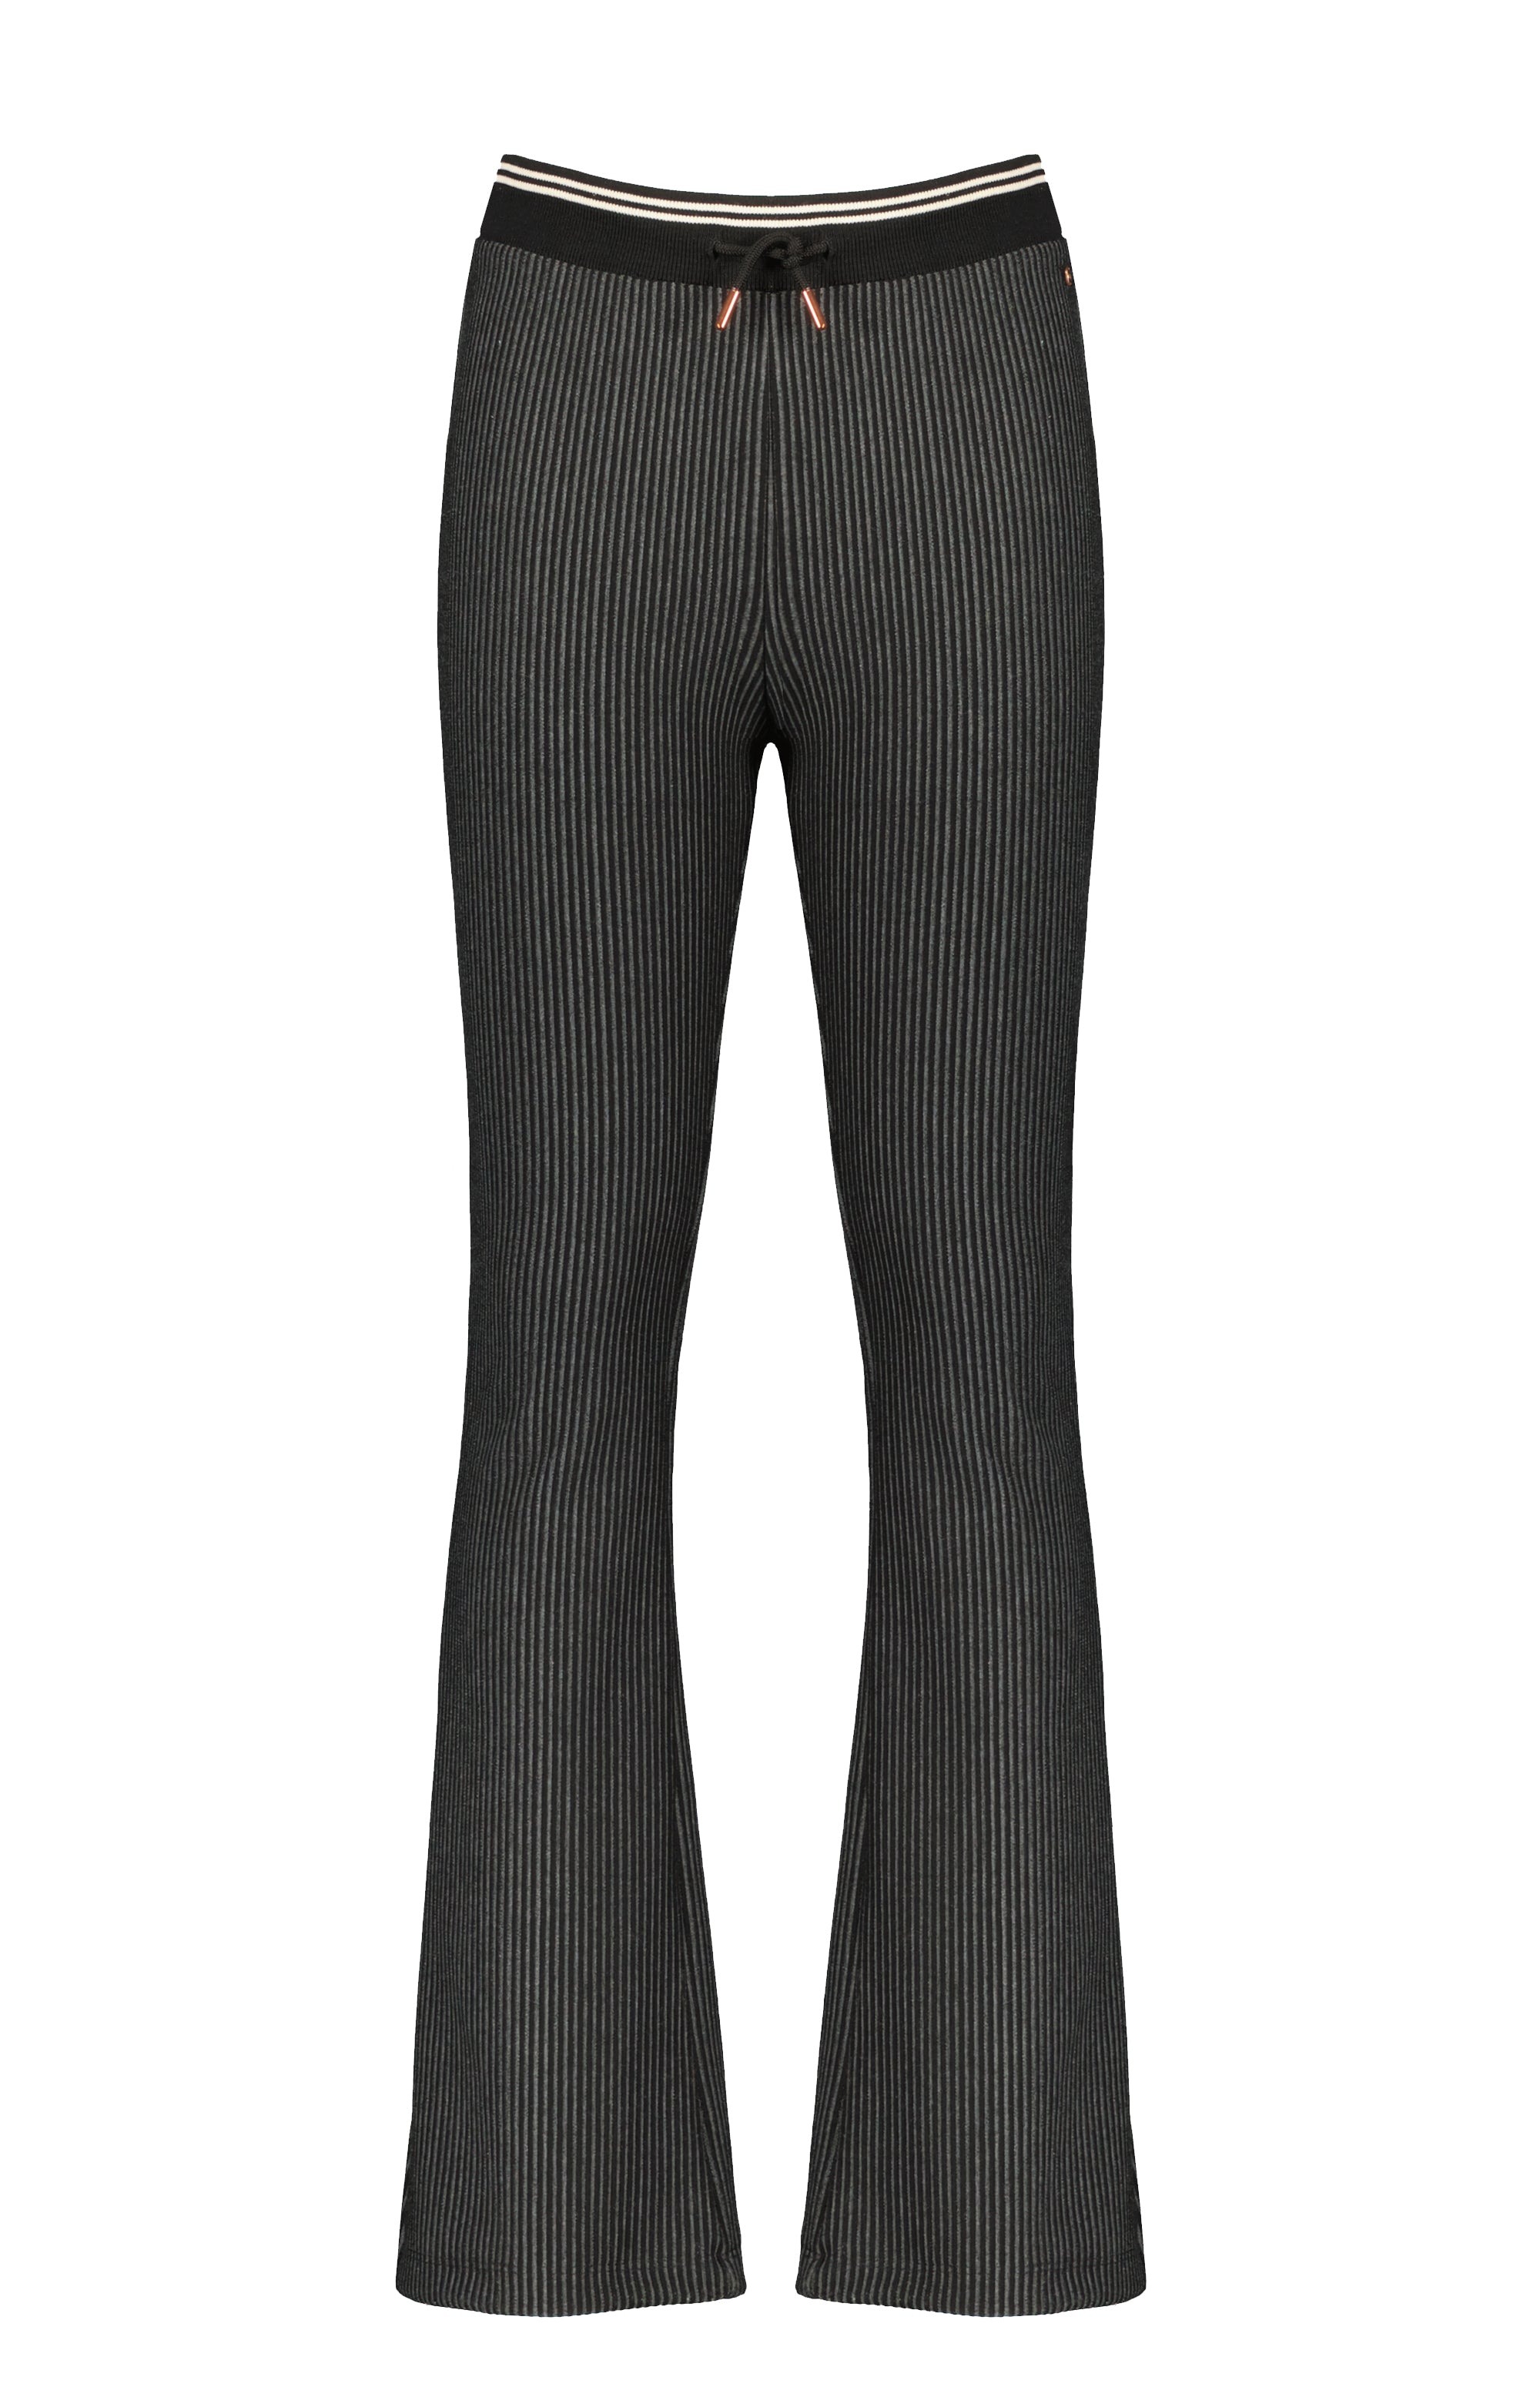 NoBell Sadia striped flared pants with ribbed waistband